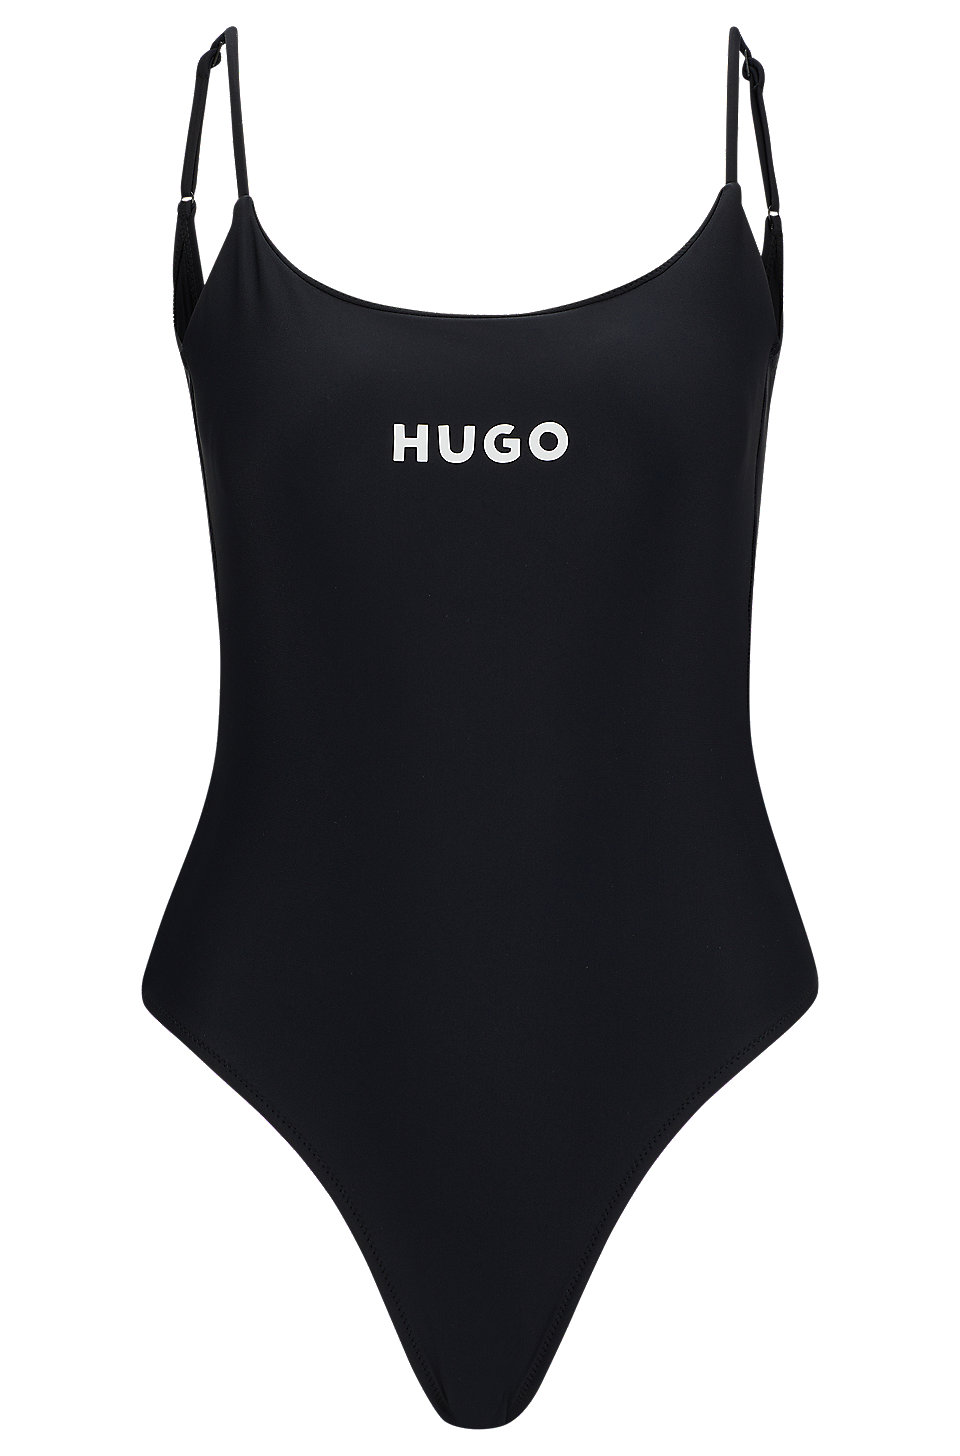 HUGO - Quick-dry swimsuit with contrast logo